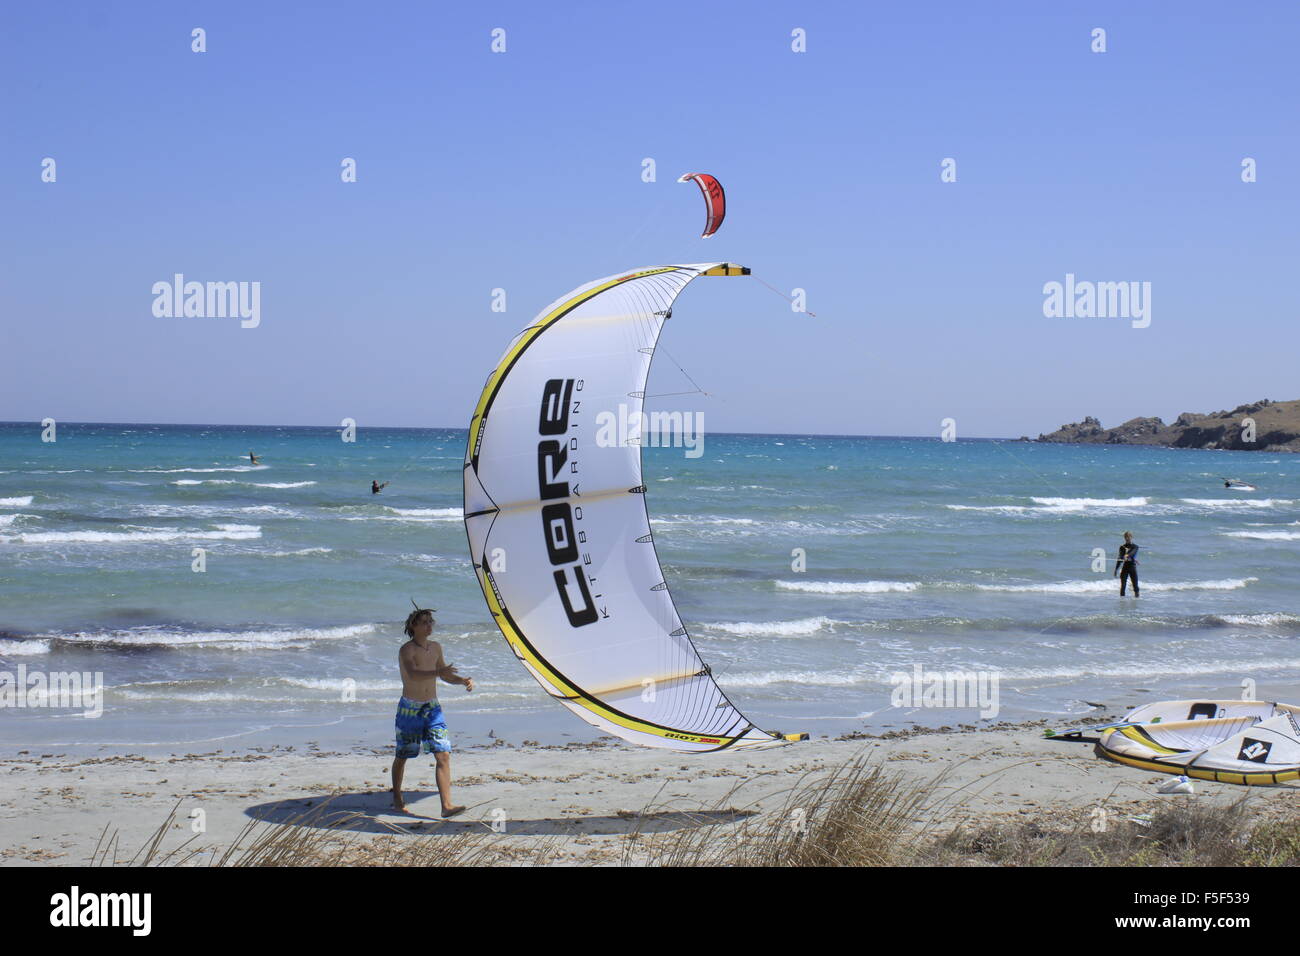 Swimmer trying to catch kite's struts while a surfer (in the sea) manouvres on Keros bay. Lemnos or limnos island, Greece. Stock Photo